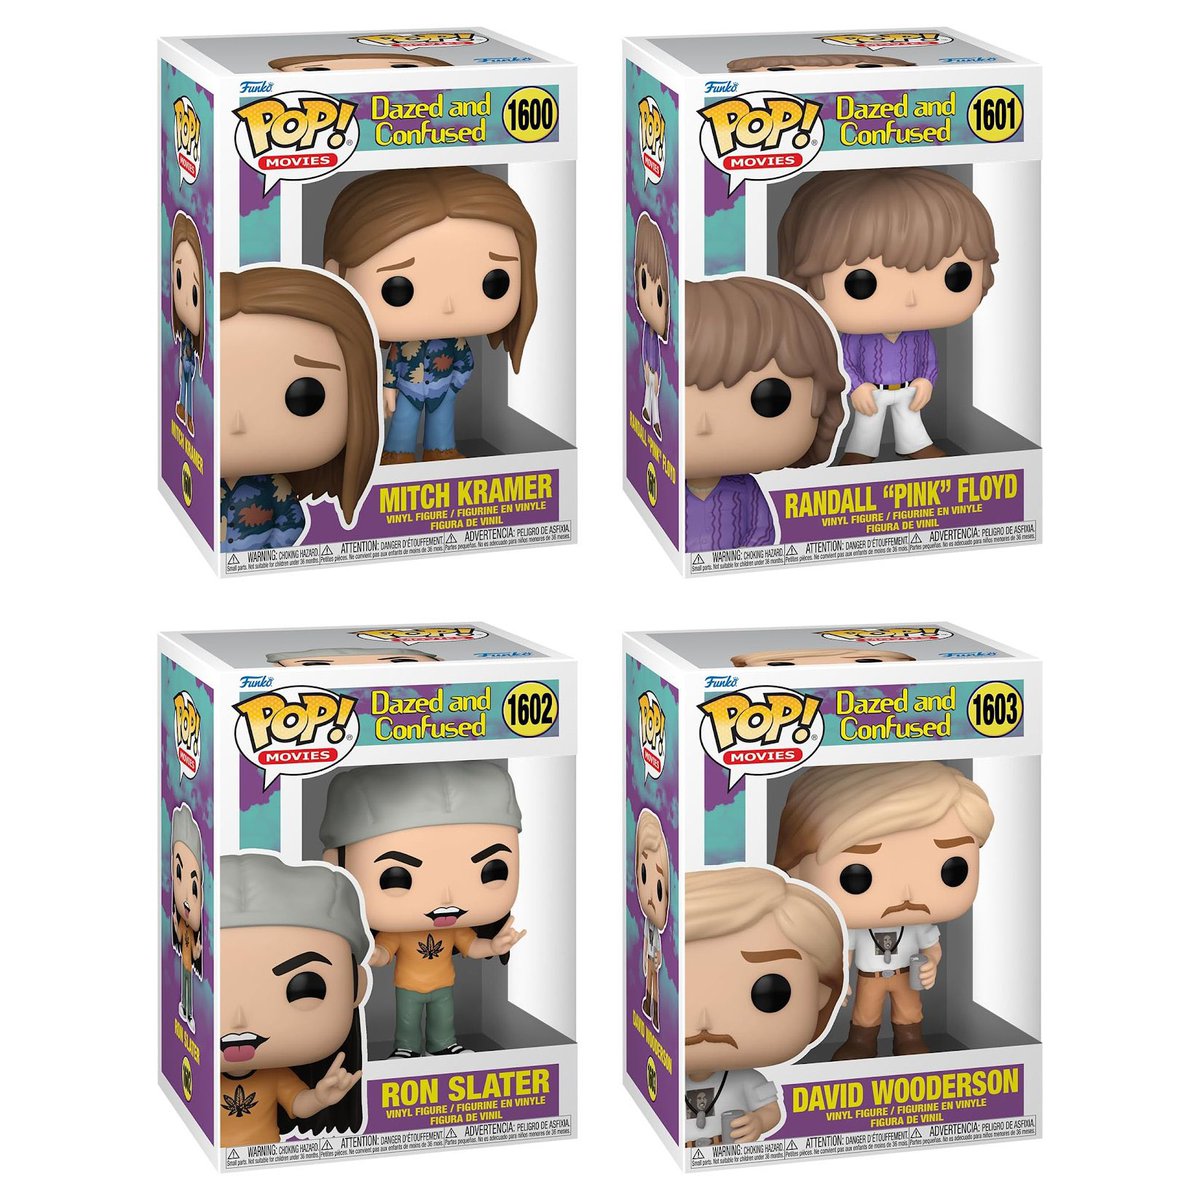 Preorder Now: Funko Pop! Movies: Dazed and Confused on Amazon 📦 Amazon: amzn.to/4atJrE4 🌍 Ent Earth: ee.toys/QPLIOT * No Charge Until it Ships #Ad #Funko #FunkoPop #FunkoPops #FunkoPopVinyl #Pop #PopVinyl #FunkoCollector #Collectible #Collectibles #Toy